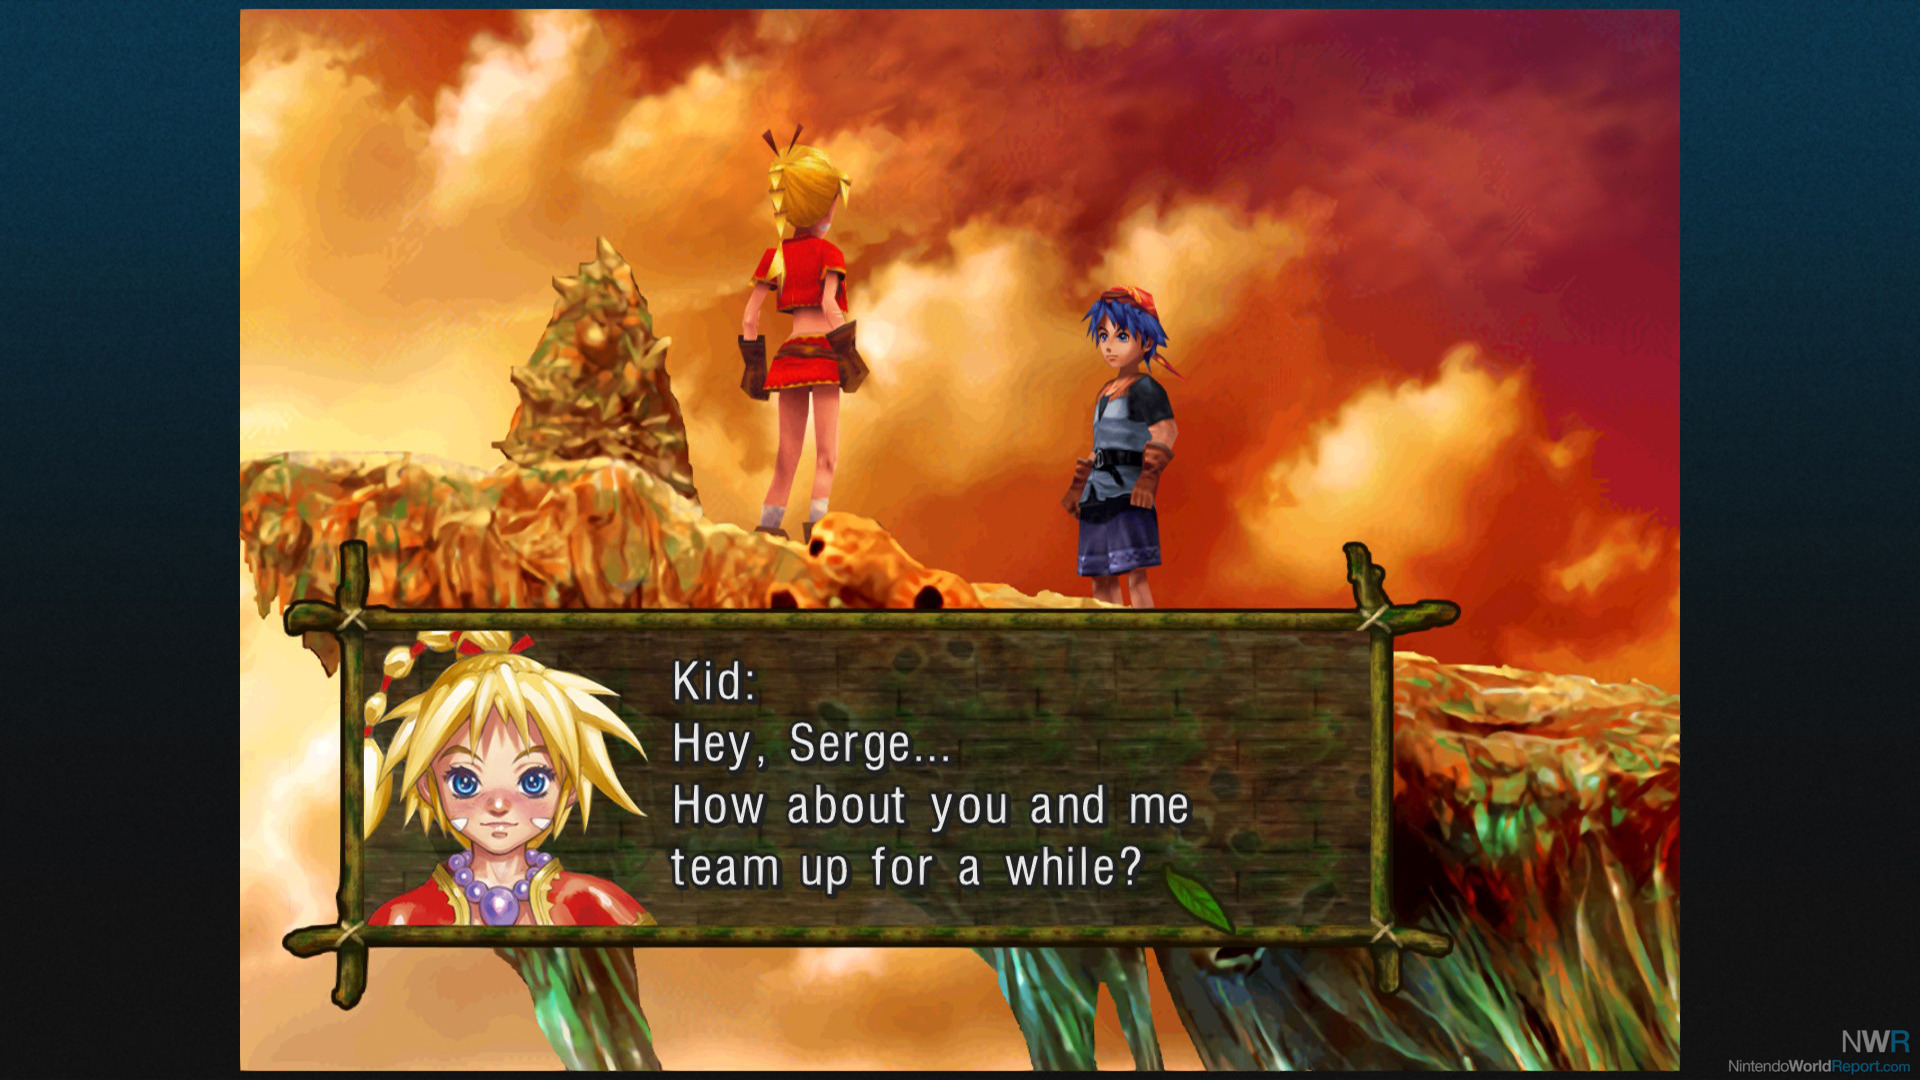 Chrono Cross: The Radical Dreamers Edition is a long-awaited remaster